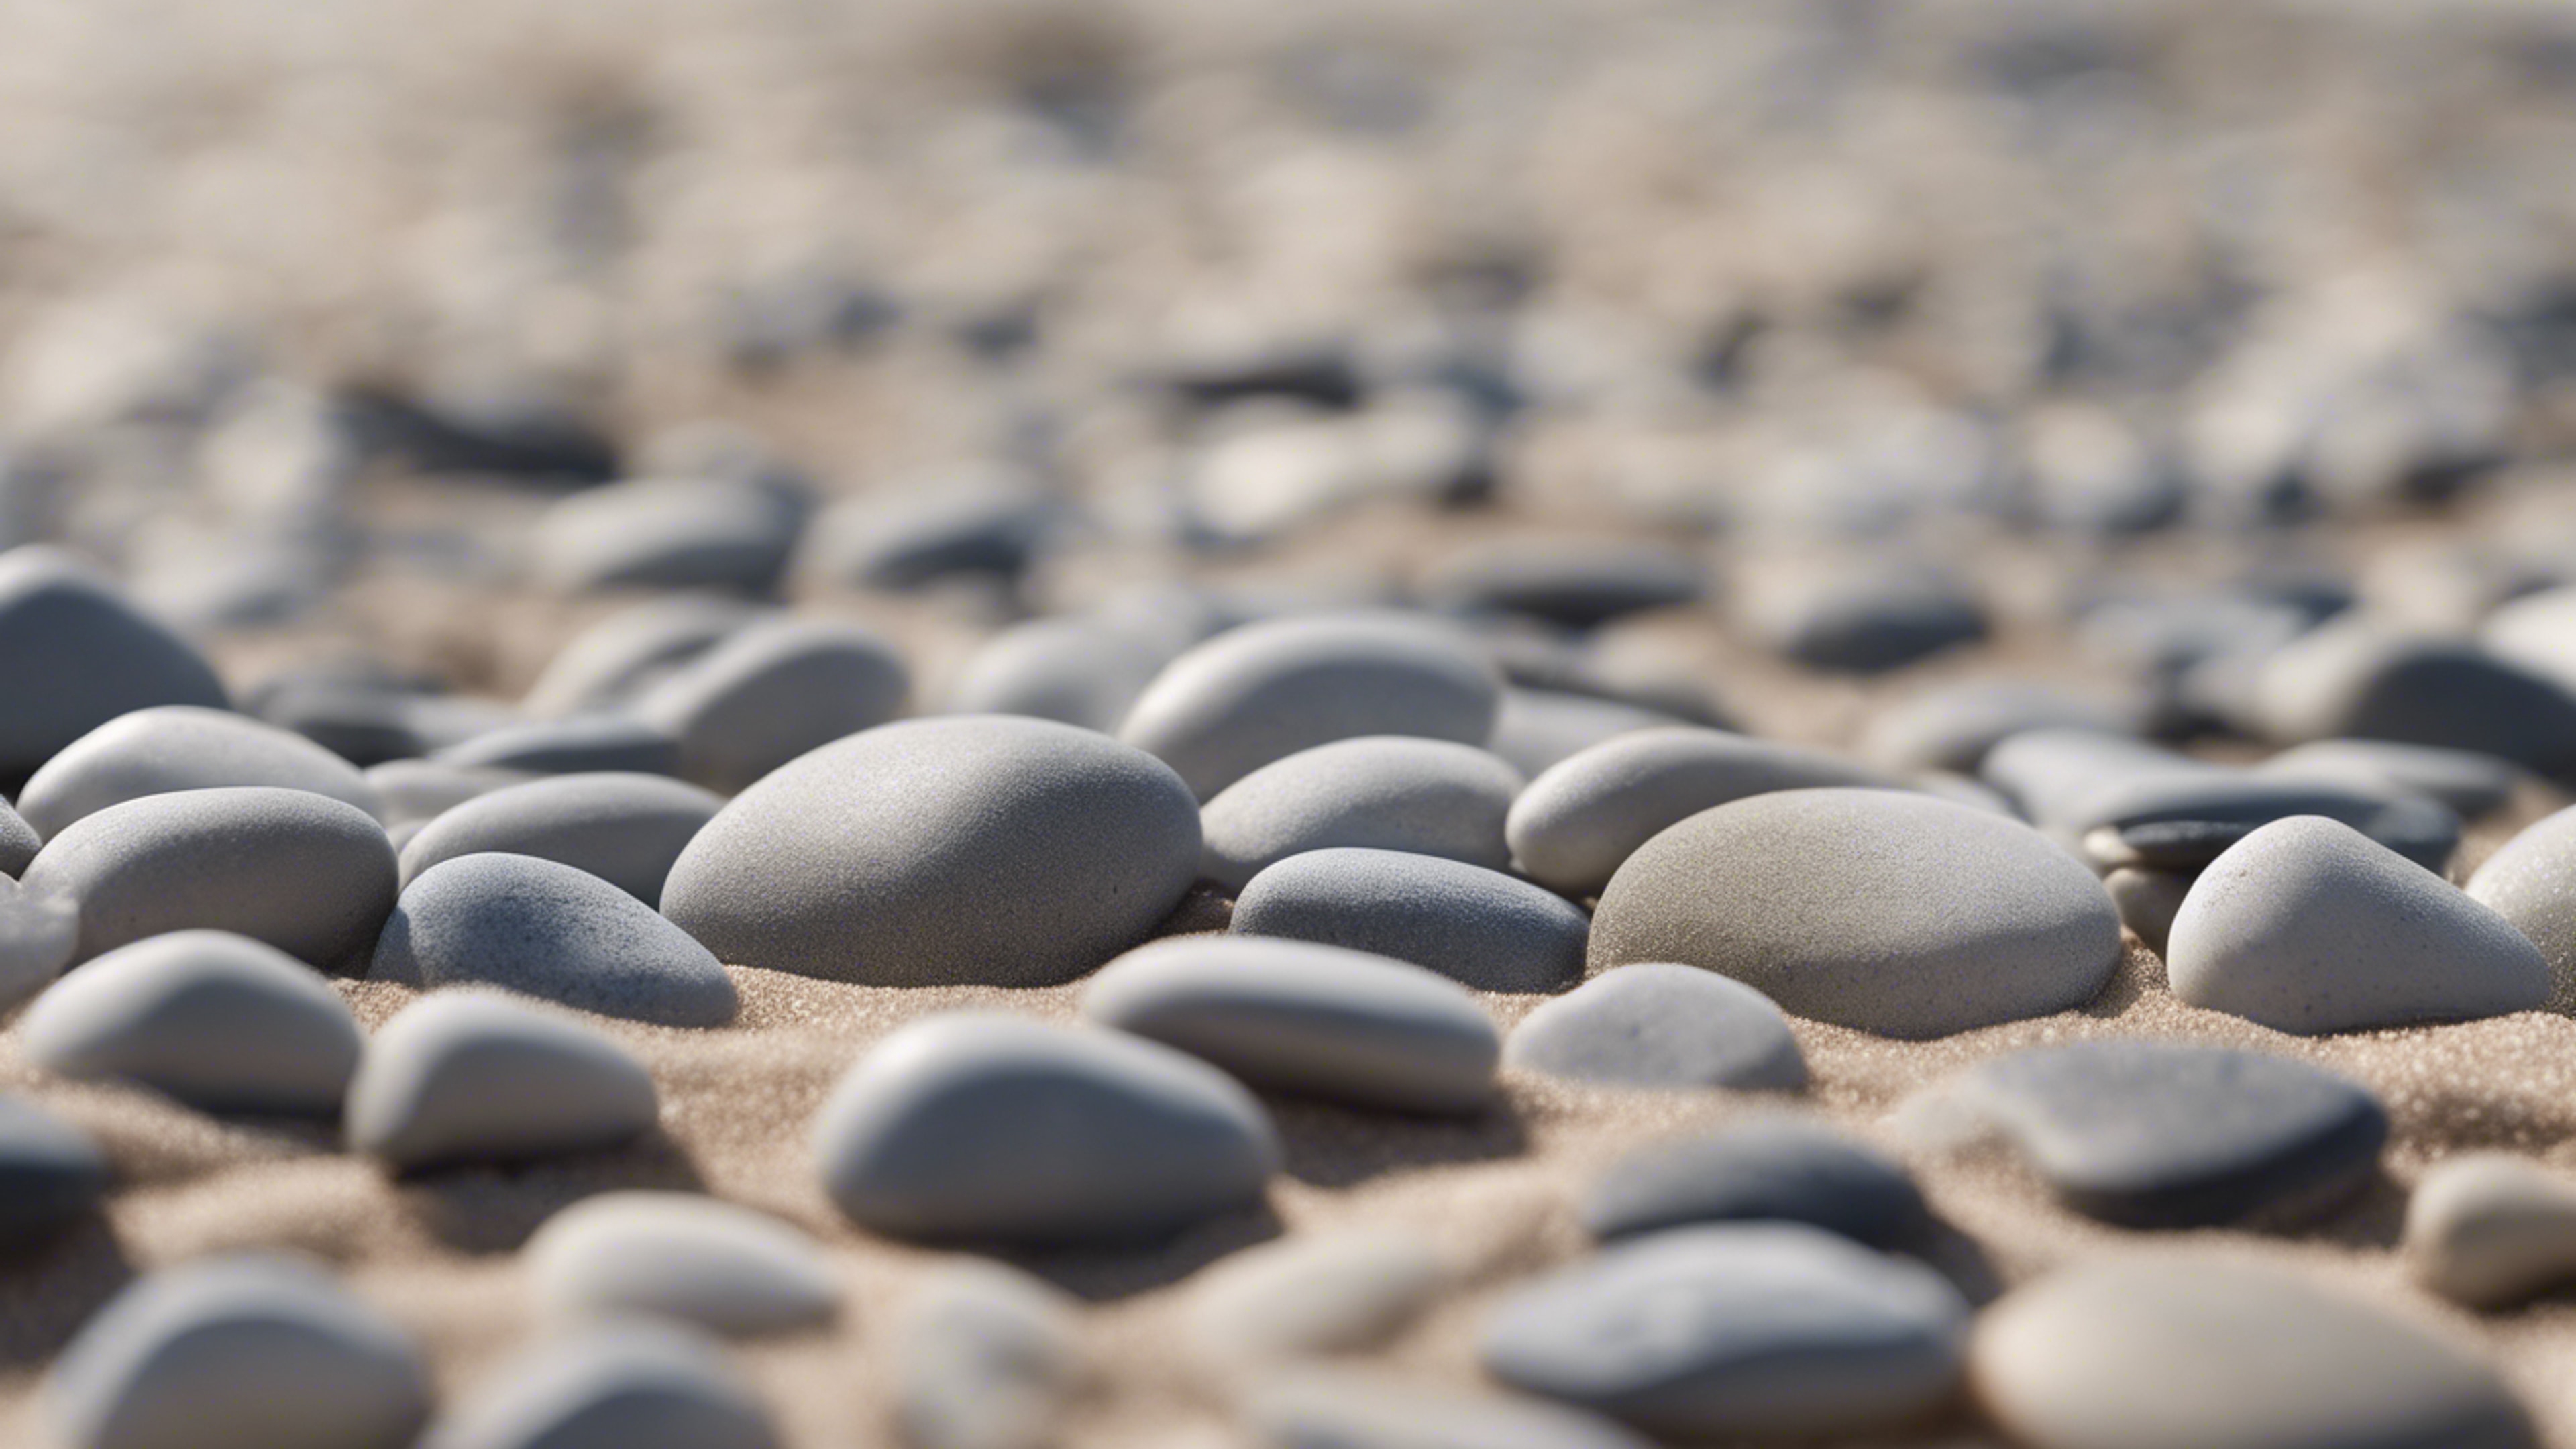 A collection of light gray pebbles arranged in an intricate pattern on a sandy beach. Kertas dinding[7440af21c01a4a2abeaf]